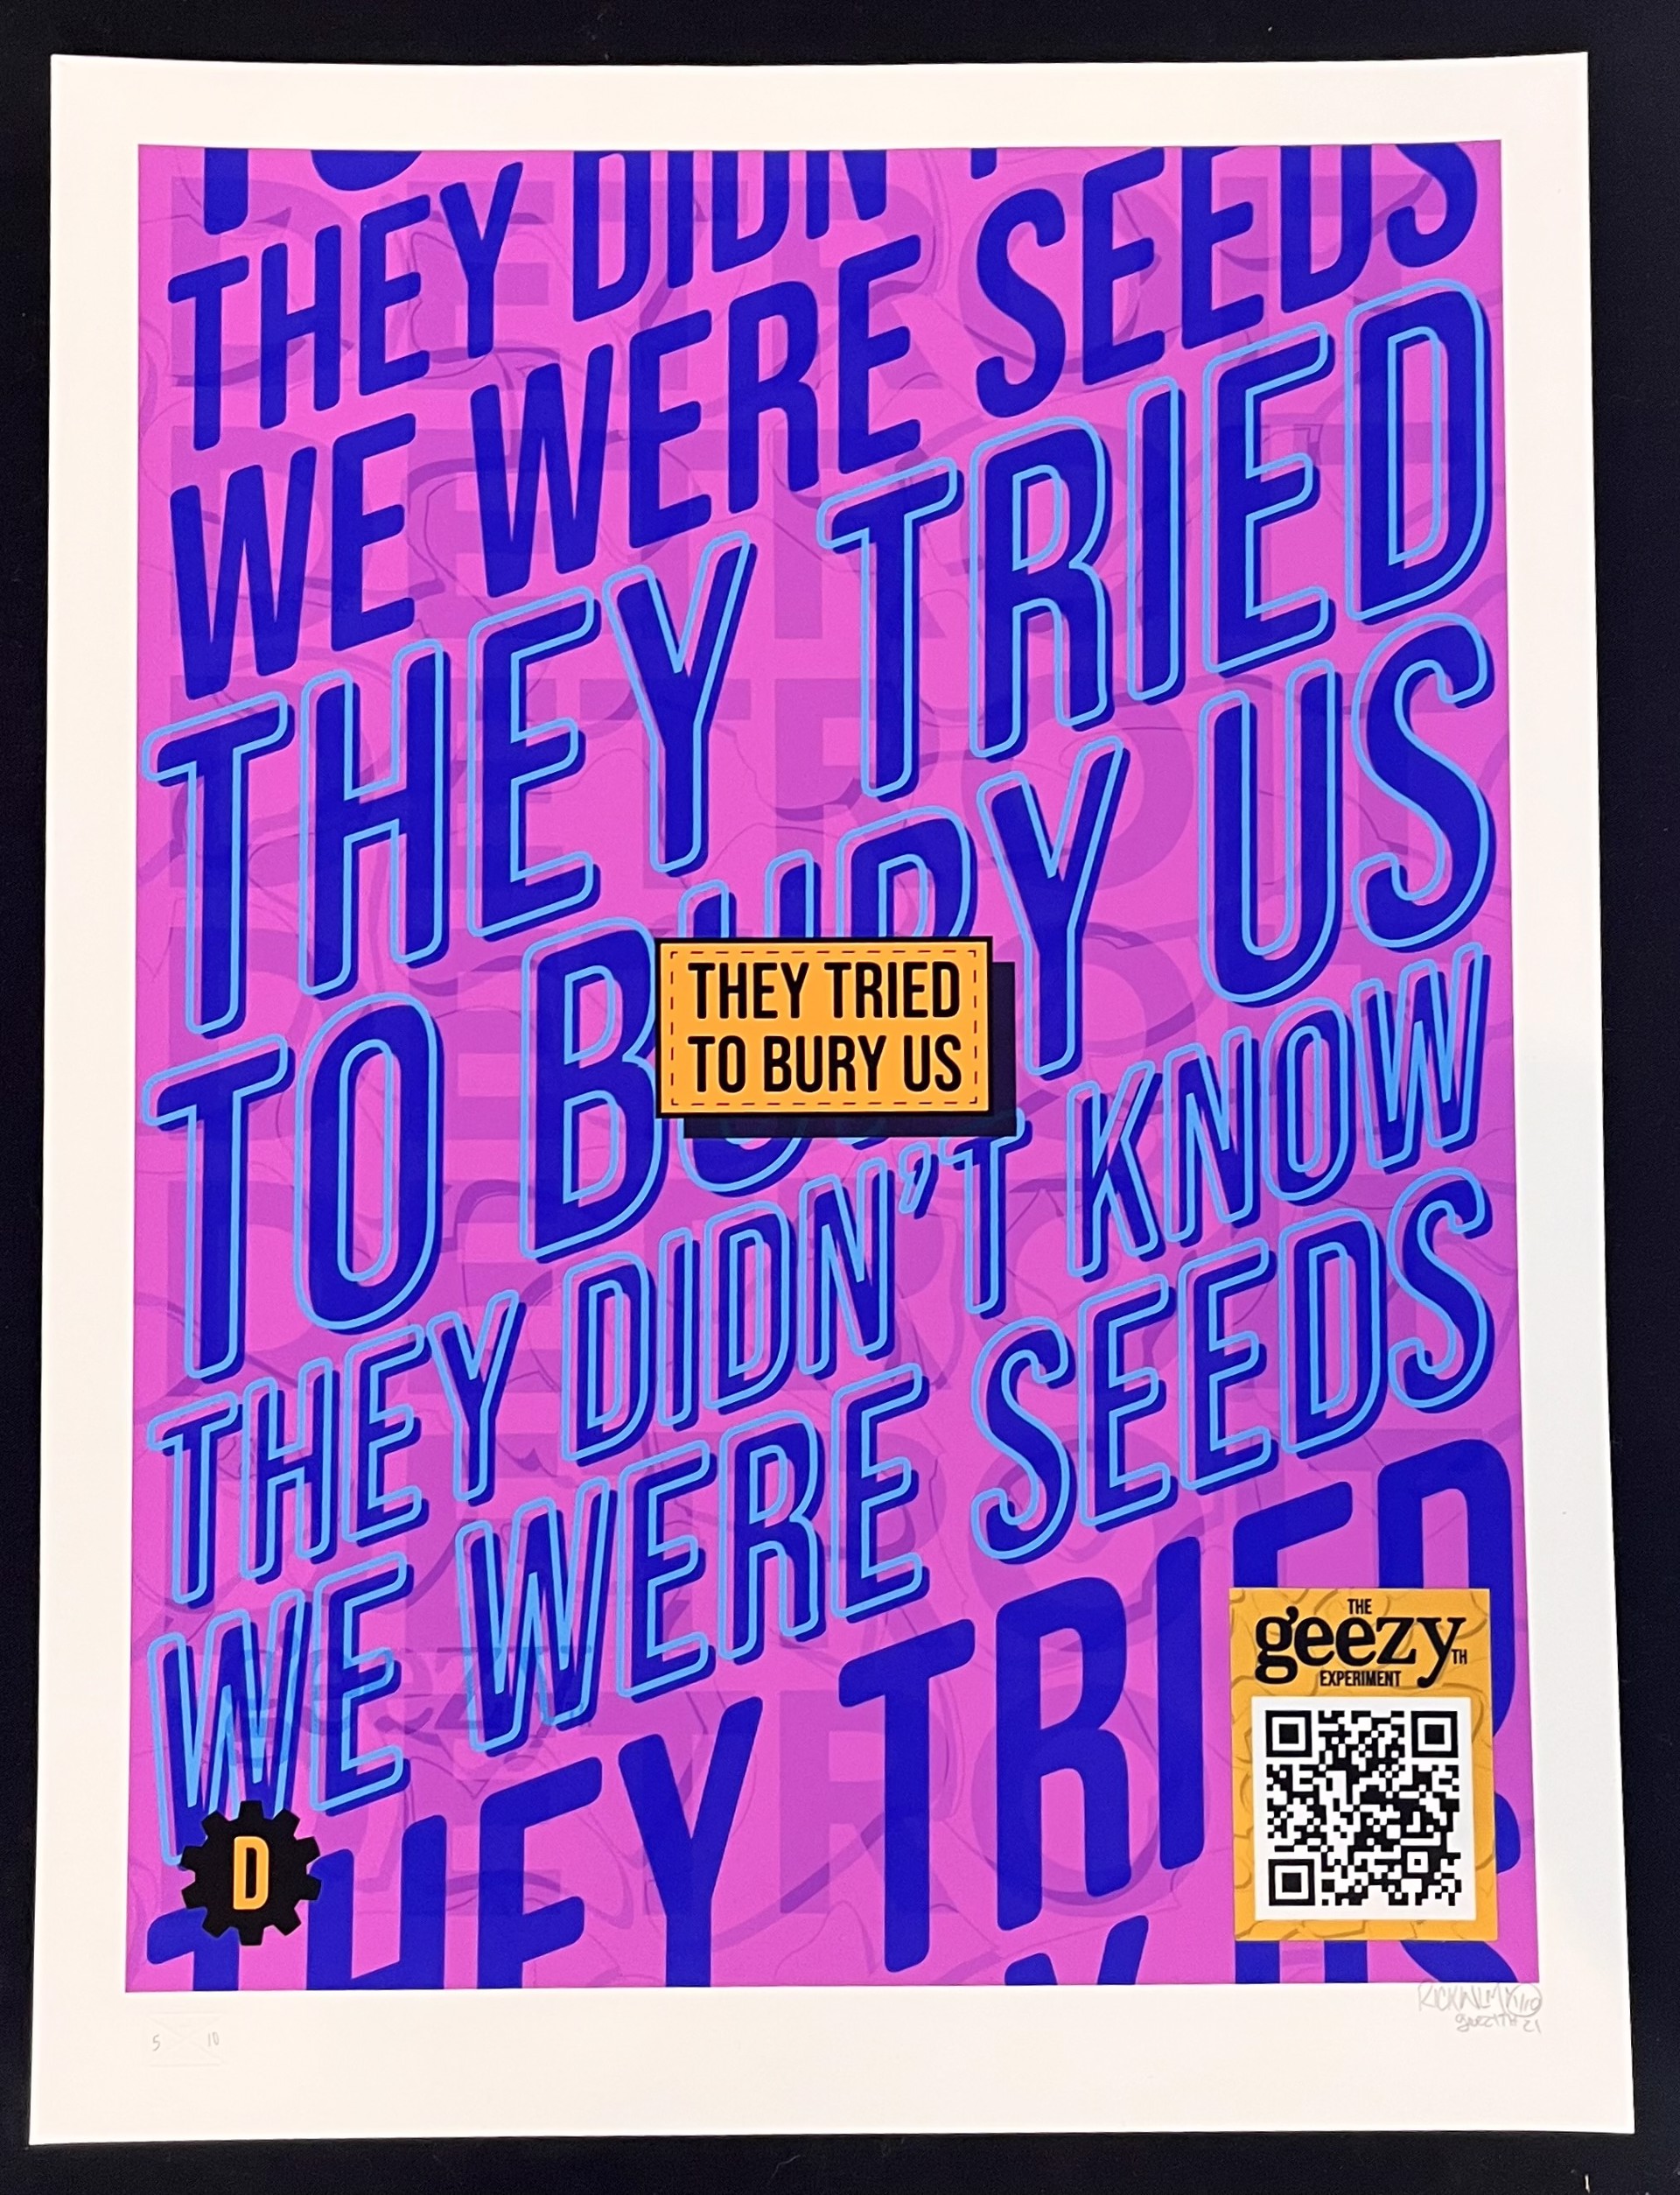 We Are Seeds by Rick Williams